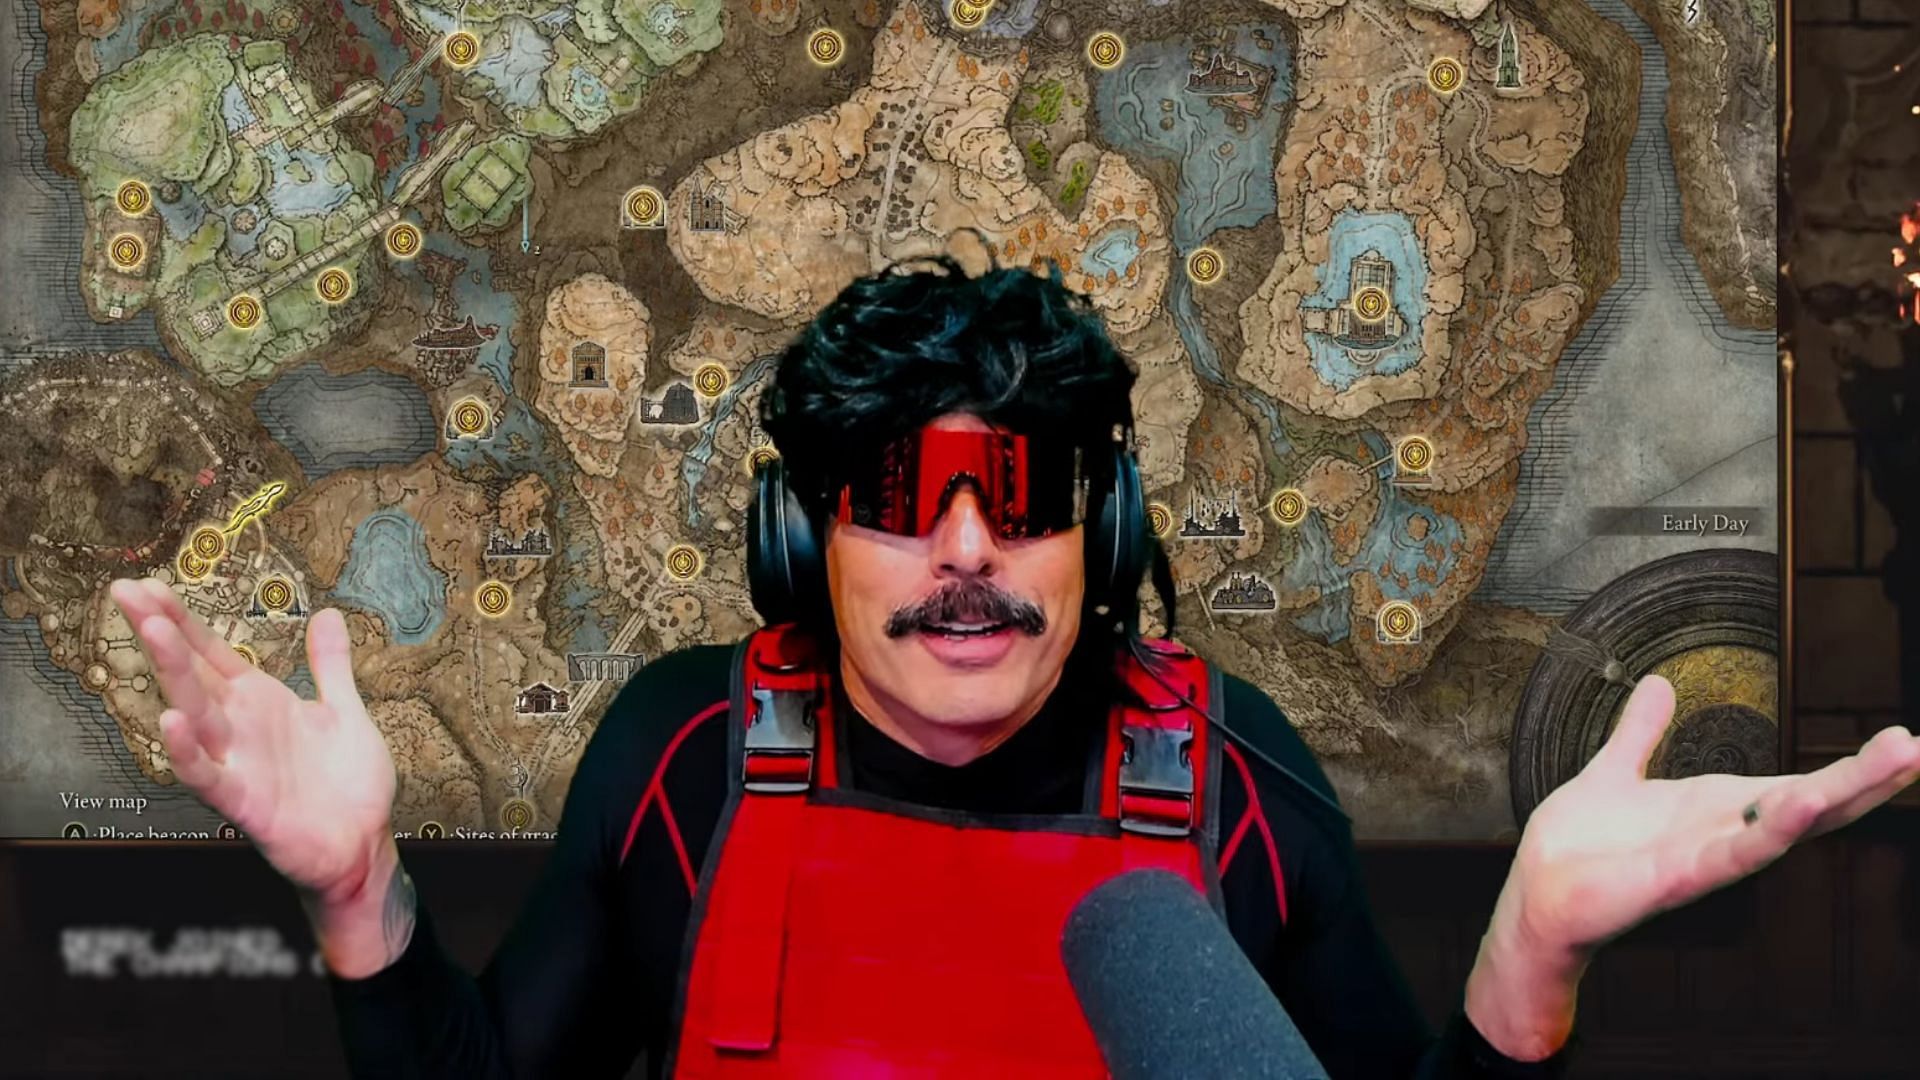 Dr DisRespect may be looking for retirement after Midnight Society cuts ties